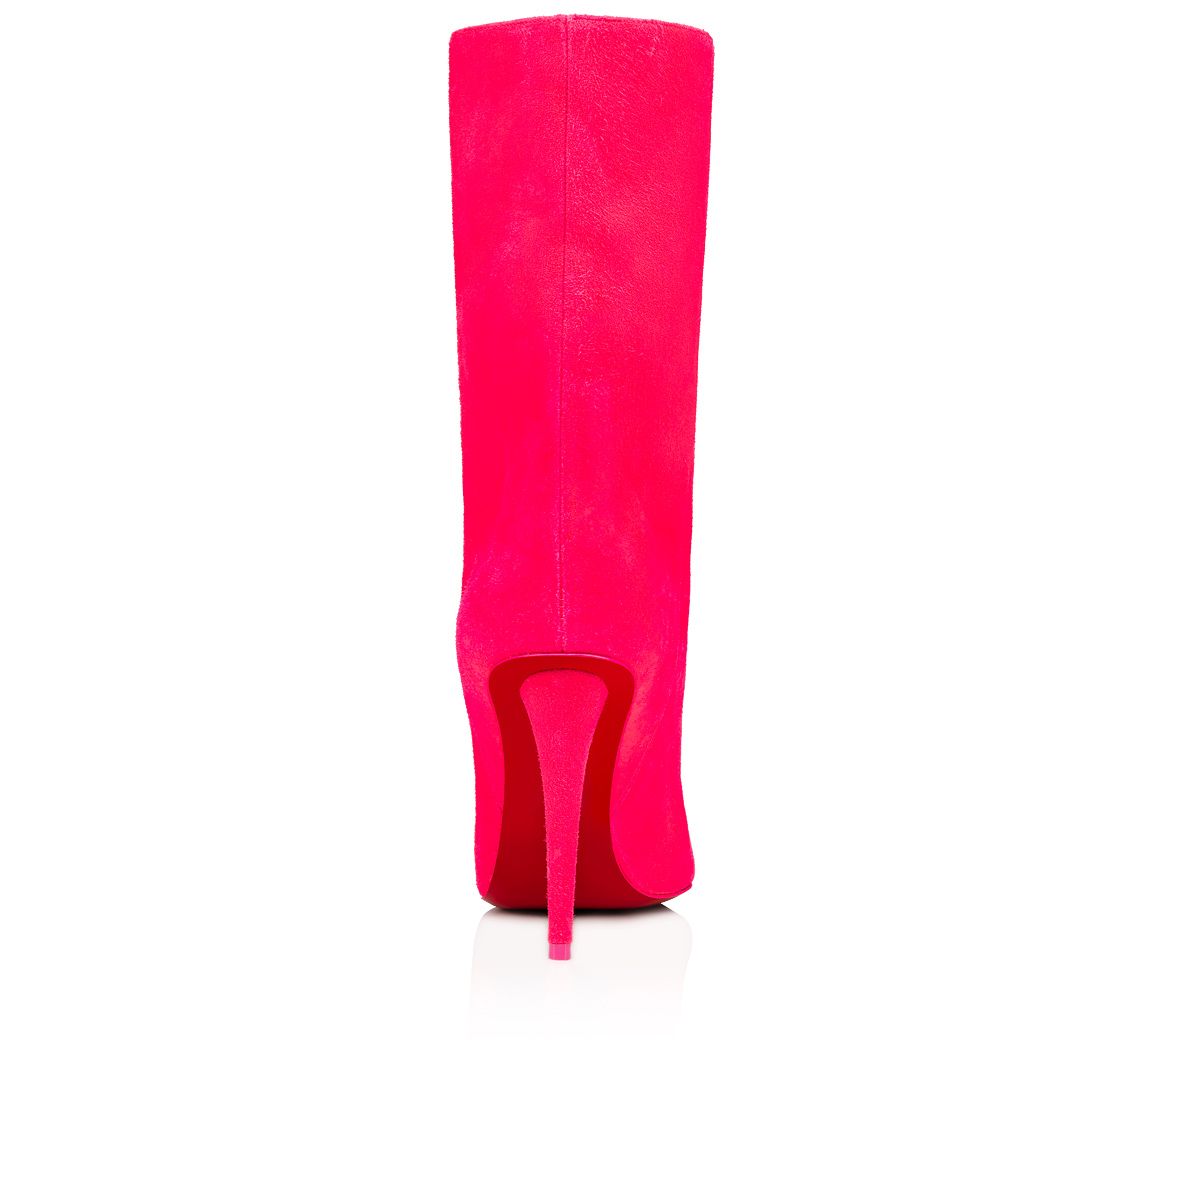 Christian Louboutin Astrilarge Knee High Pointed Toe Boot in Pink